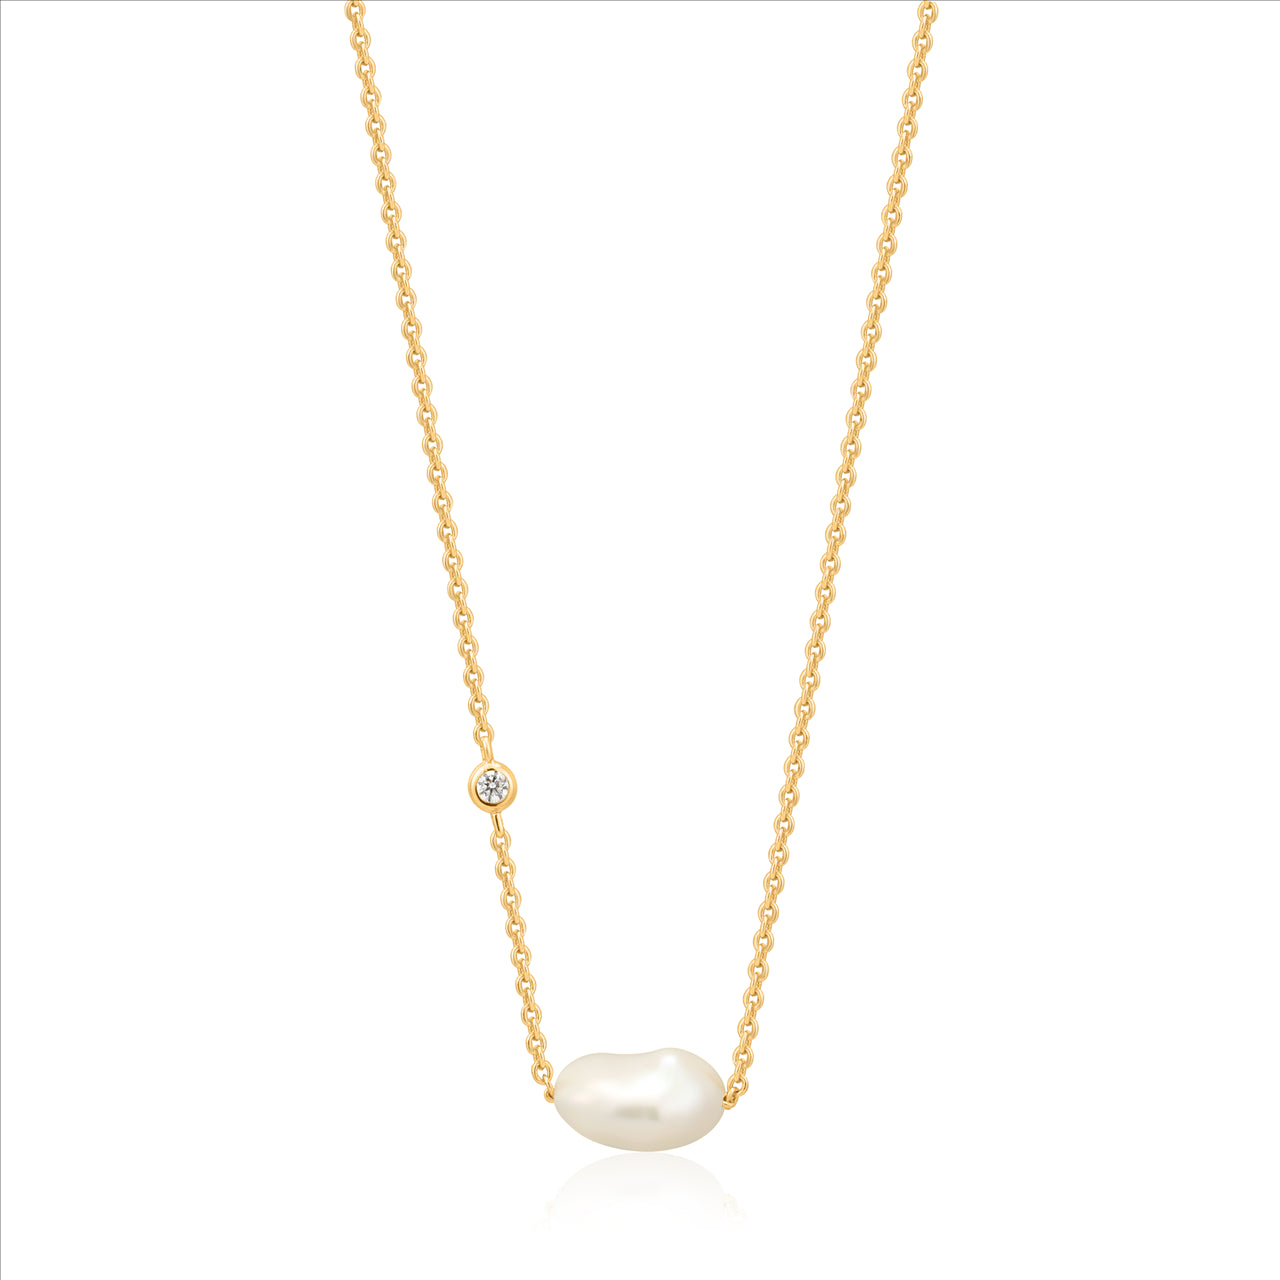 Ania Haie Gold Pearl Necklace. 14ct Gold Plated. Design:N019-02G